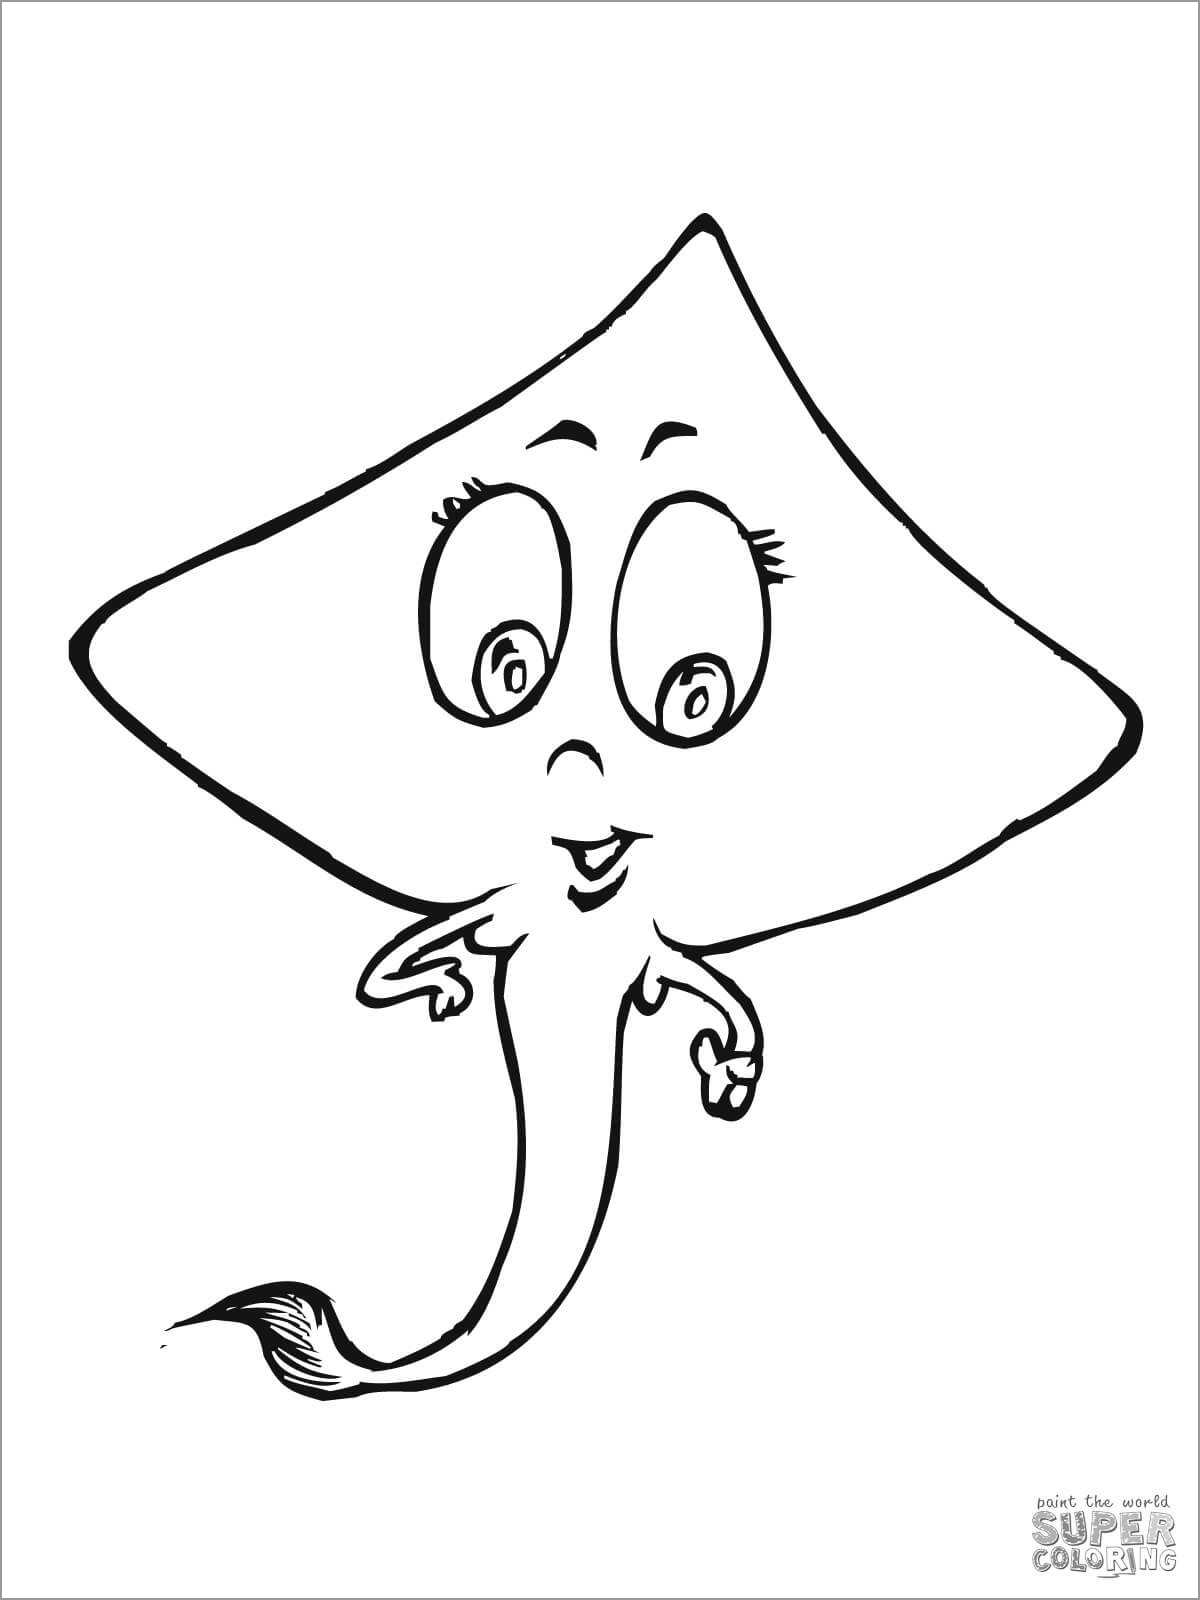 Cute Ray Coloring Page for Kids